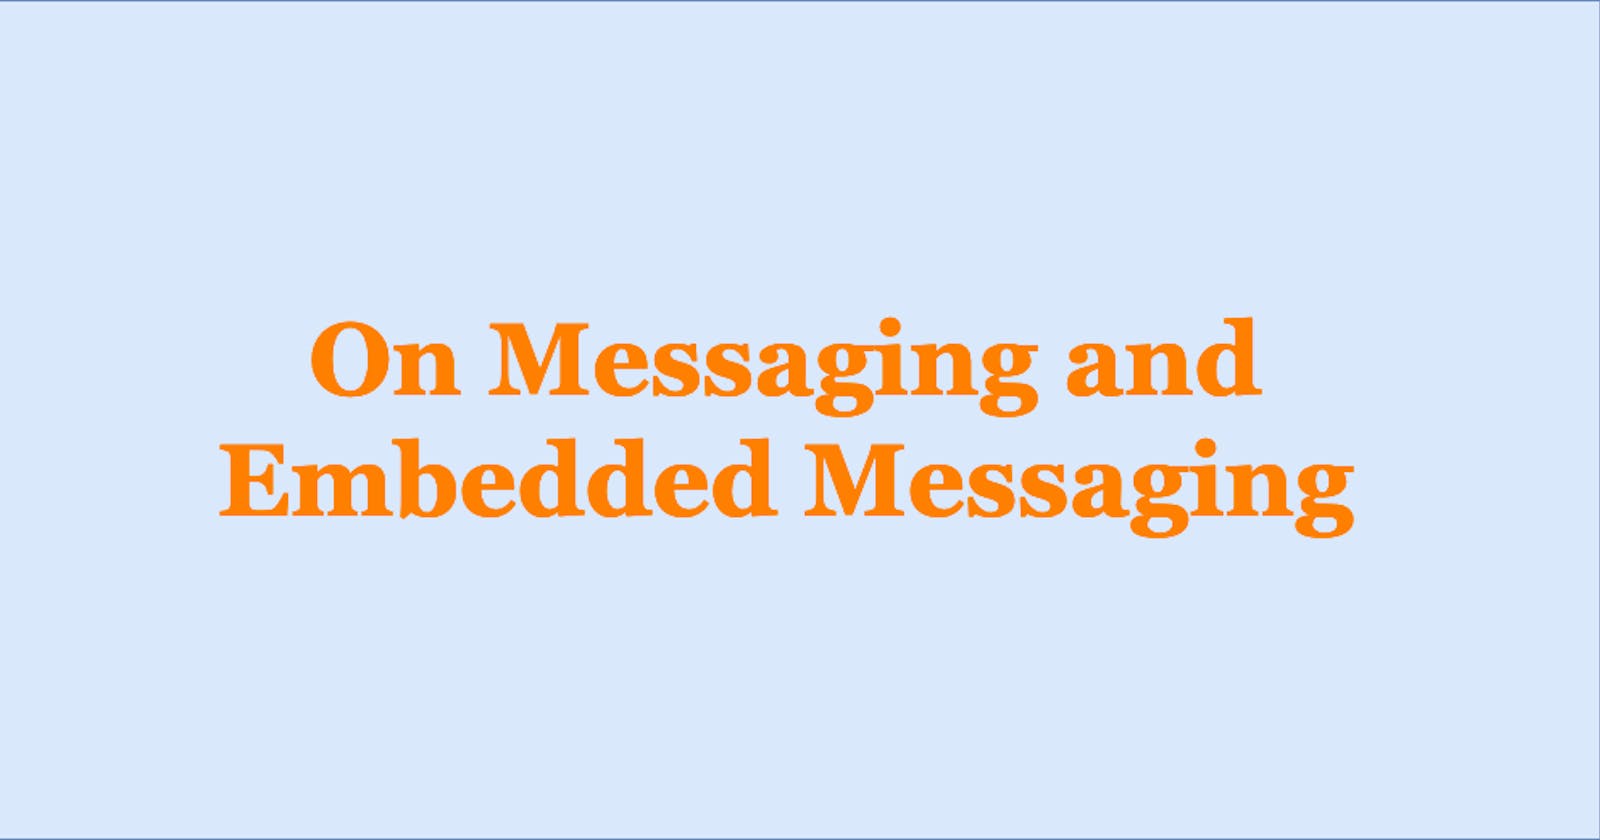 On messaging and embedded messaging